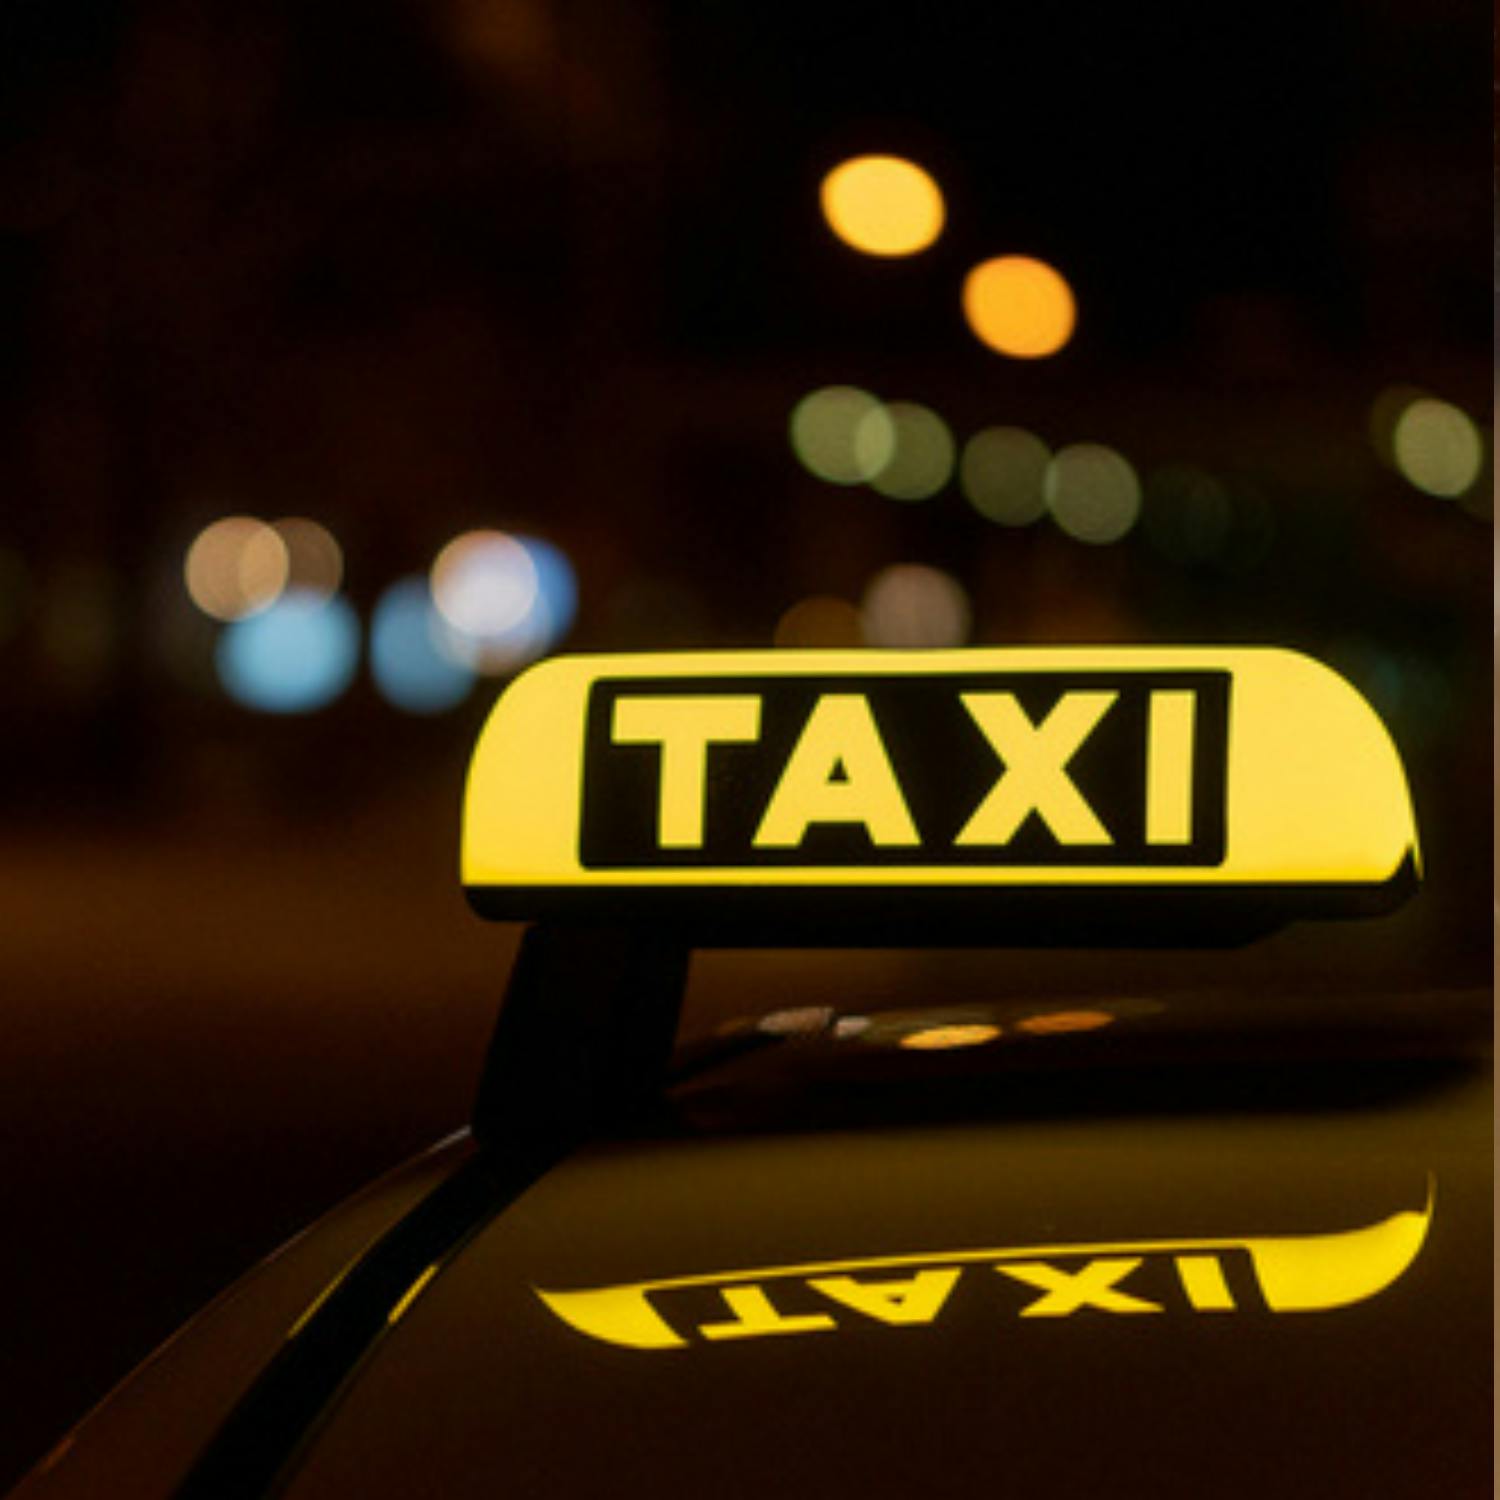 Josh Crosbie looks at the challenges of becoming a taxi driver in Ireland